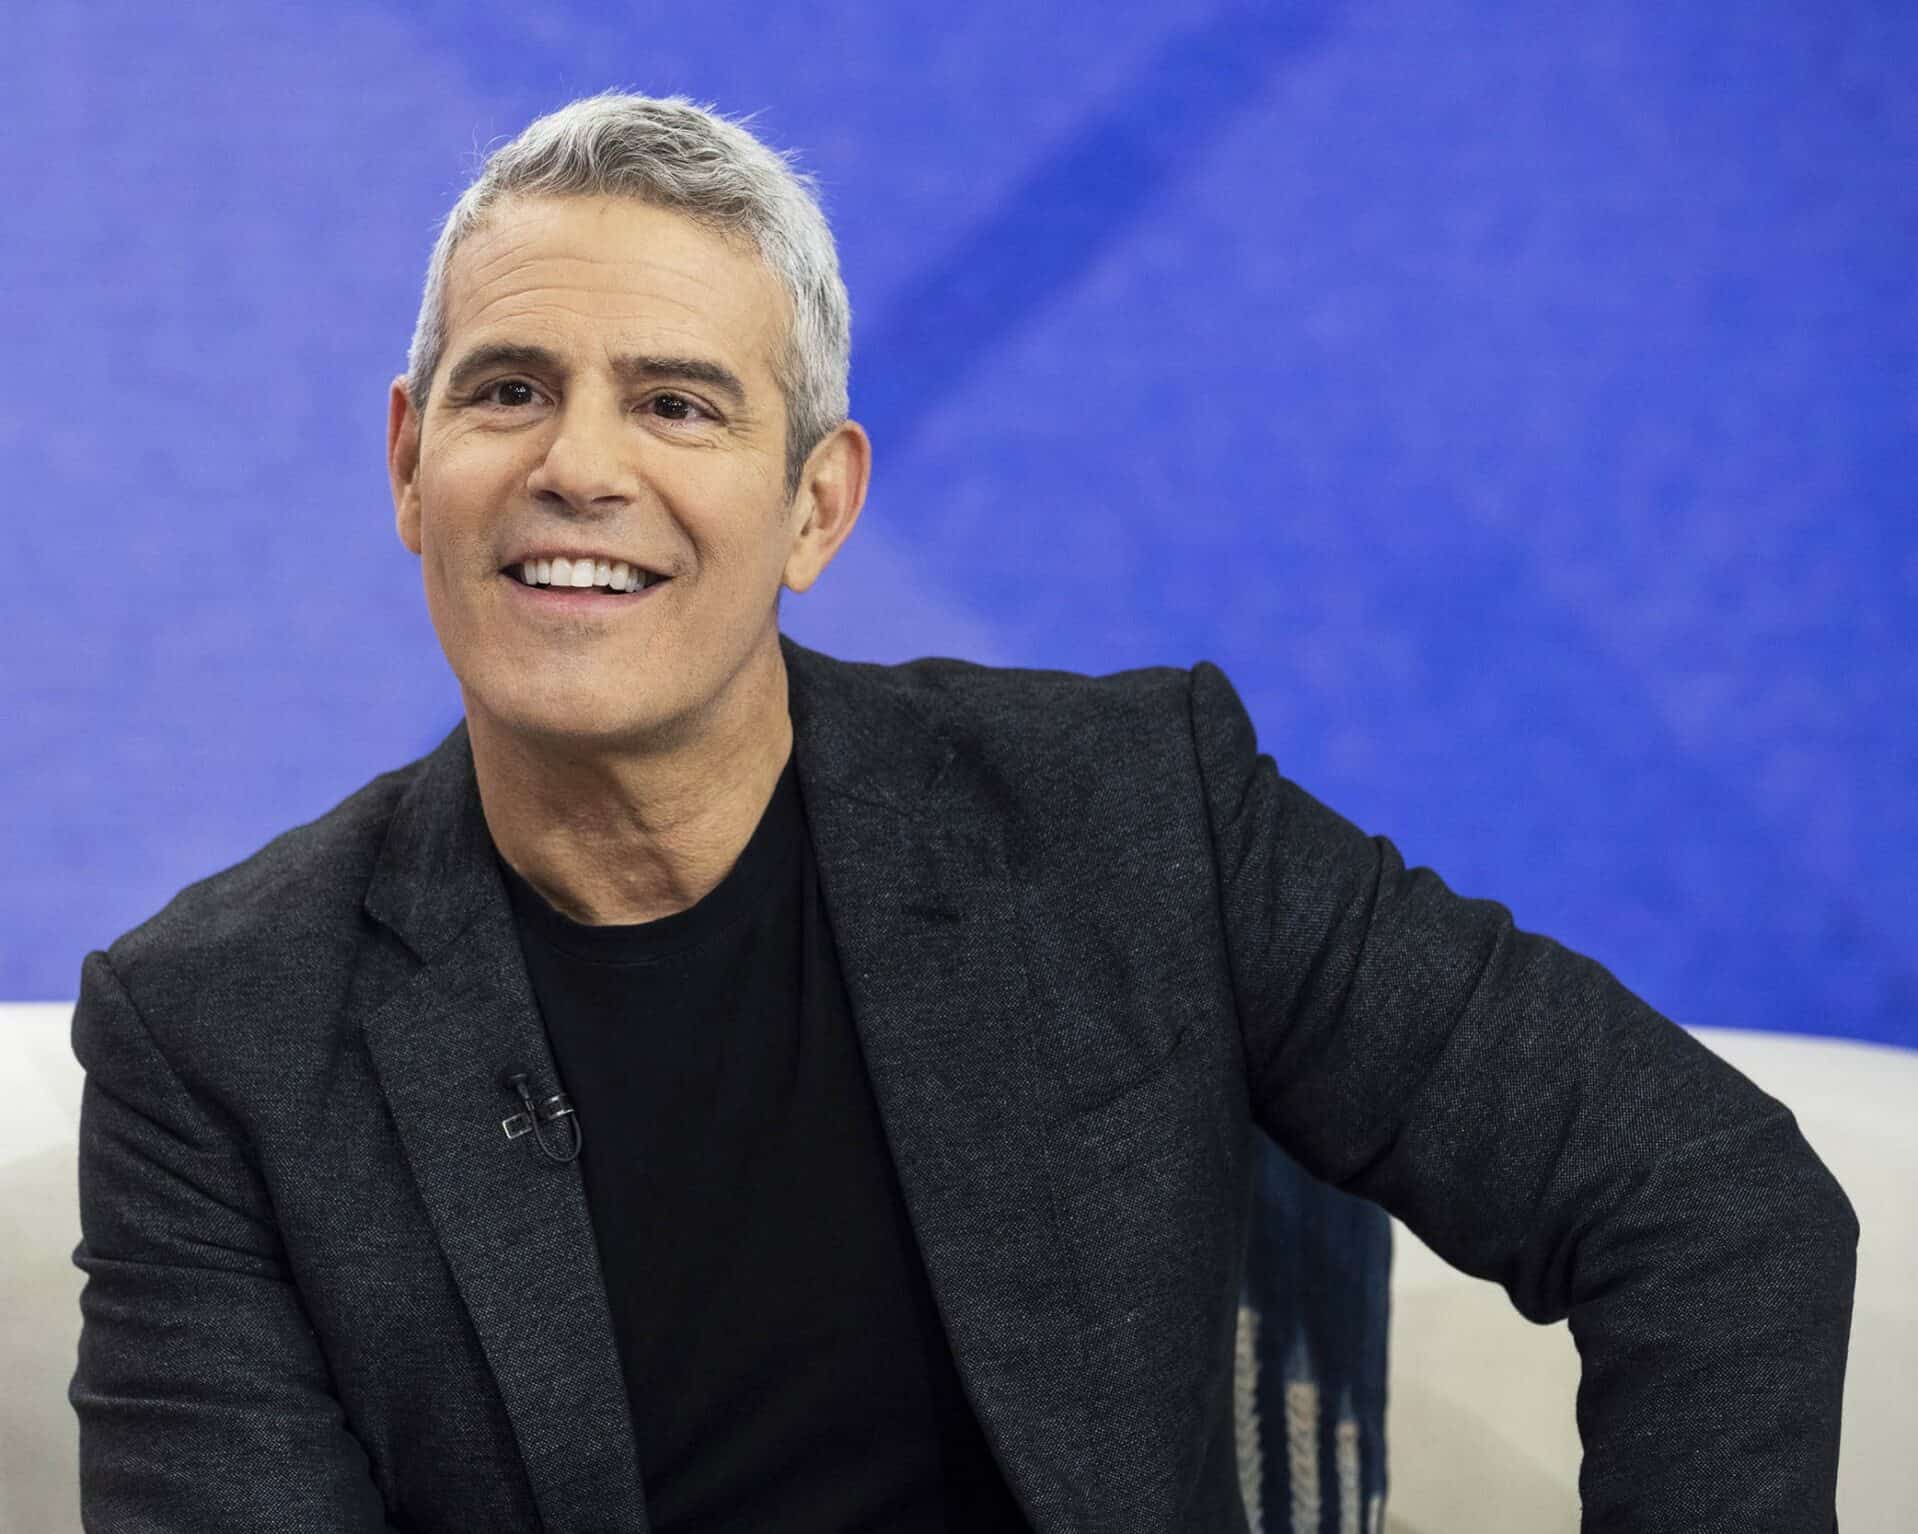 Andy Cohen started his TV career as an intern at CBS News